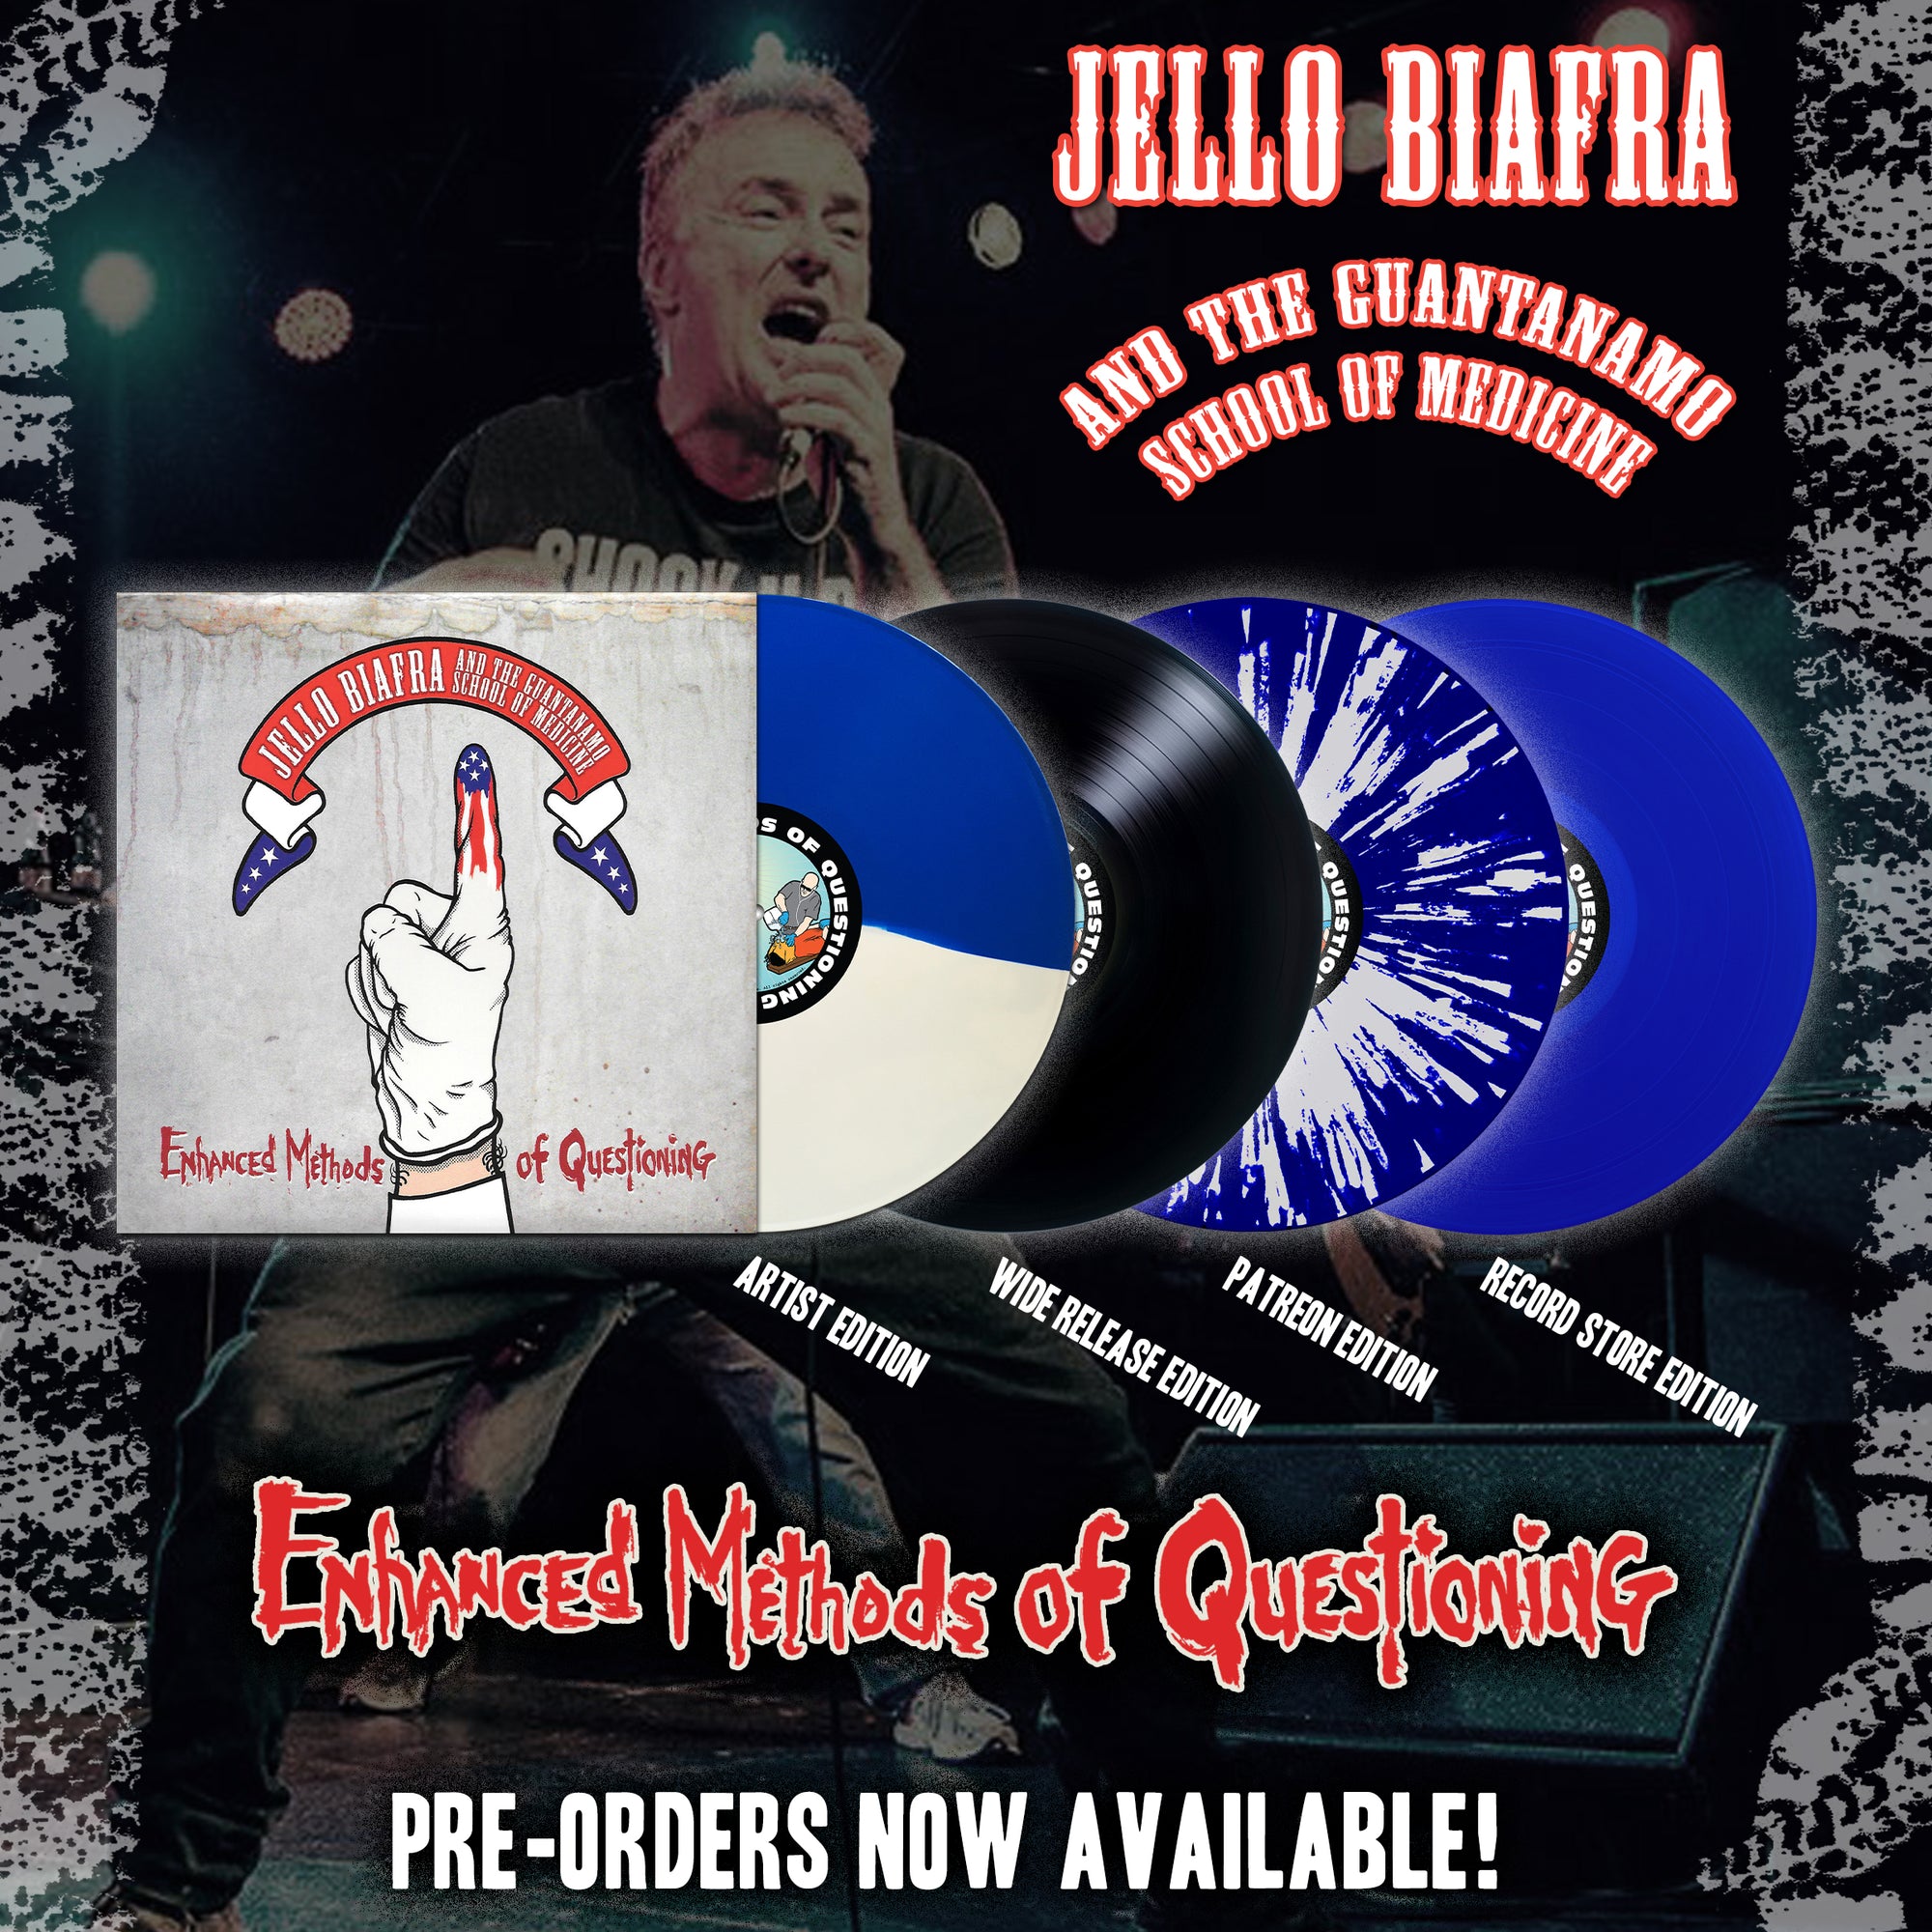 PRE-ORDER "ENHANCED METHODS OF QUESTIONING" AND "WILL THE FETUS BE ABORTED" 7"